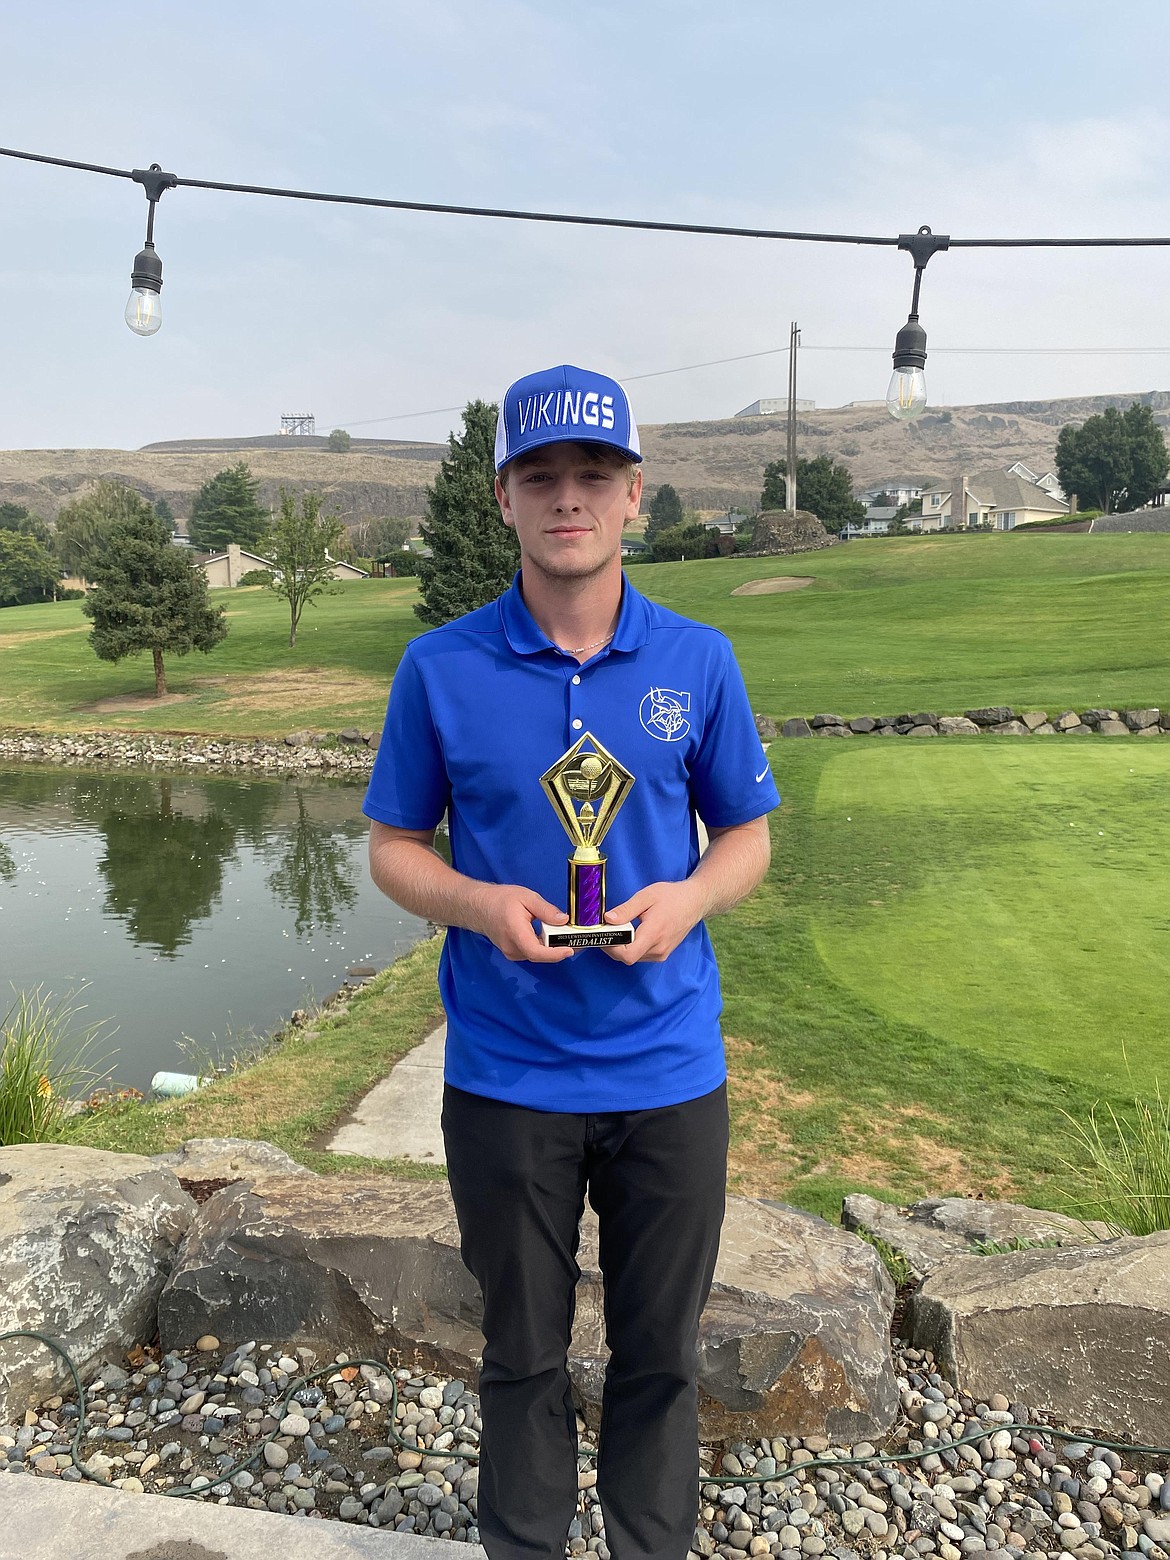 Courtesy photo
Coeur d'Alene senior Trey Nipp claimed medalist honors in a playoff at Tuesday's Lewiston Invitational at Lewiston Country Club.